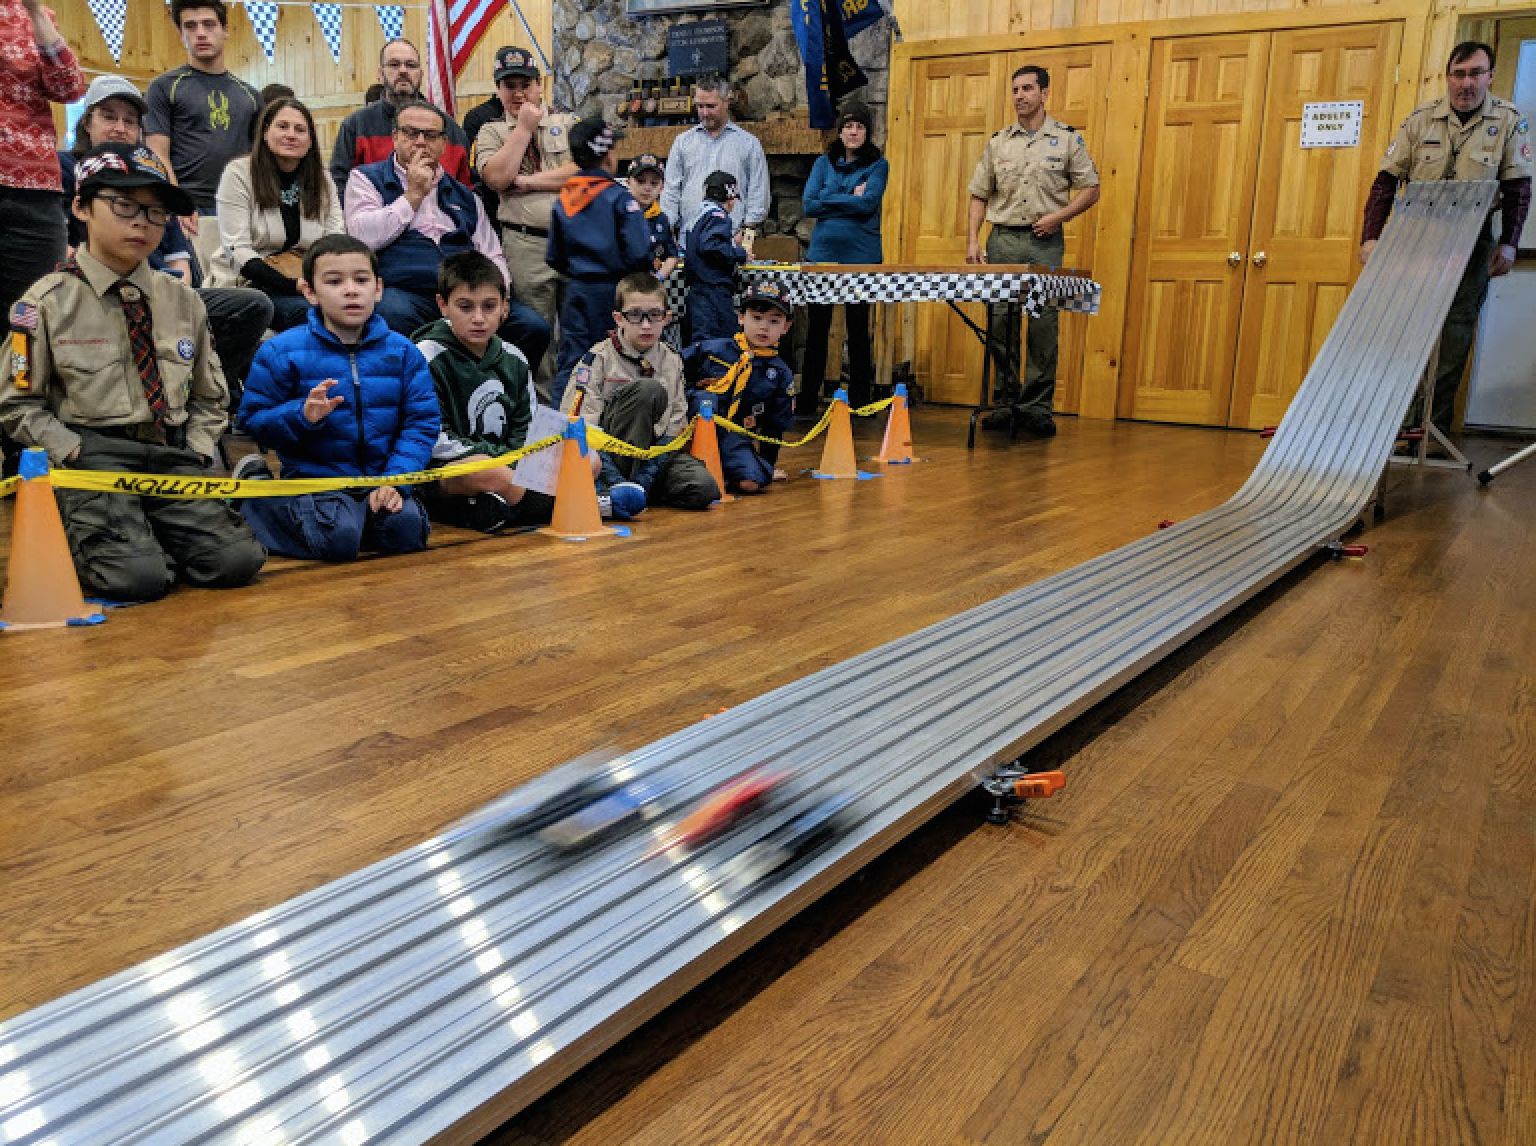 Cub Scouts watch their cars race down the track at the Pinewood Derby Championship at Seton Scout Reservation in Greenwich. Photo Credit: Marc Ducret